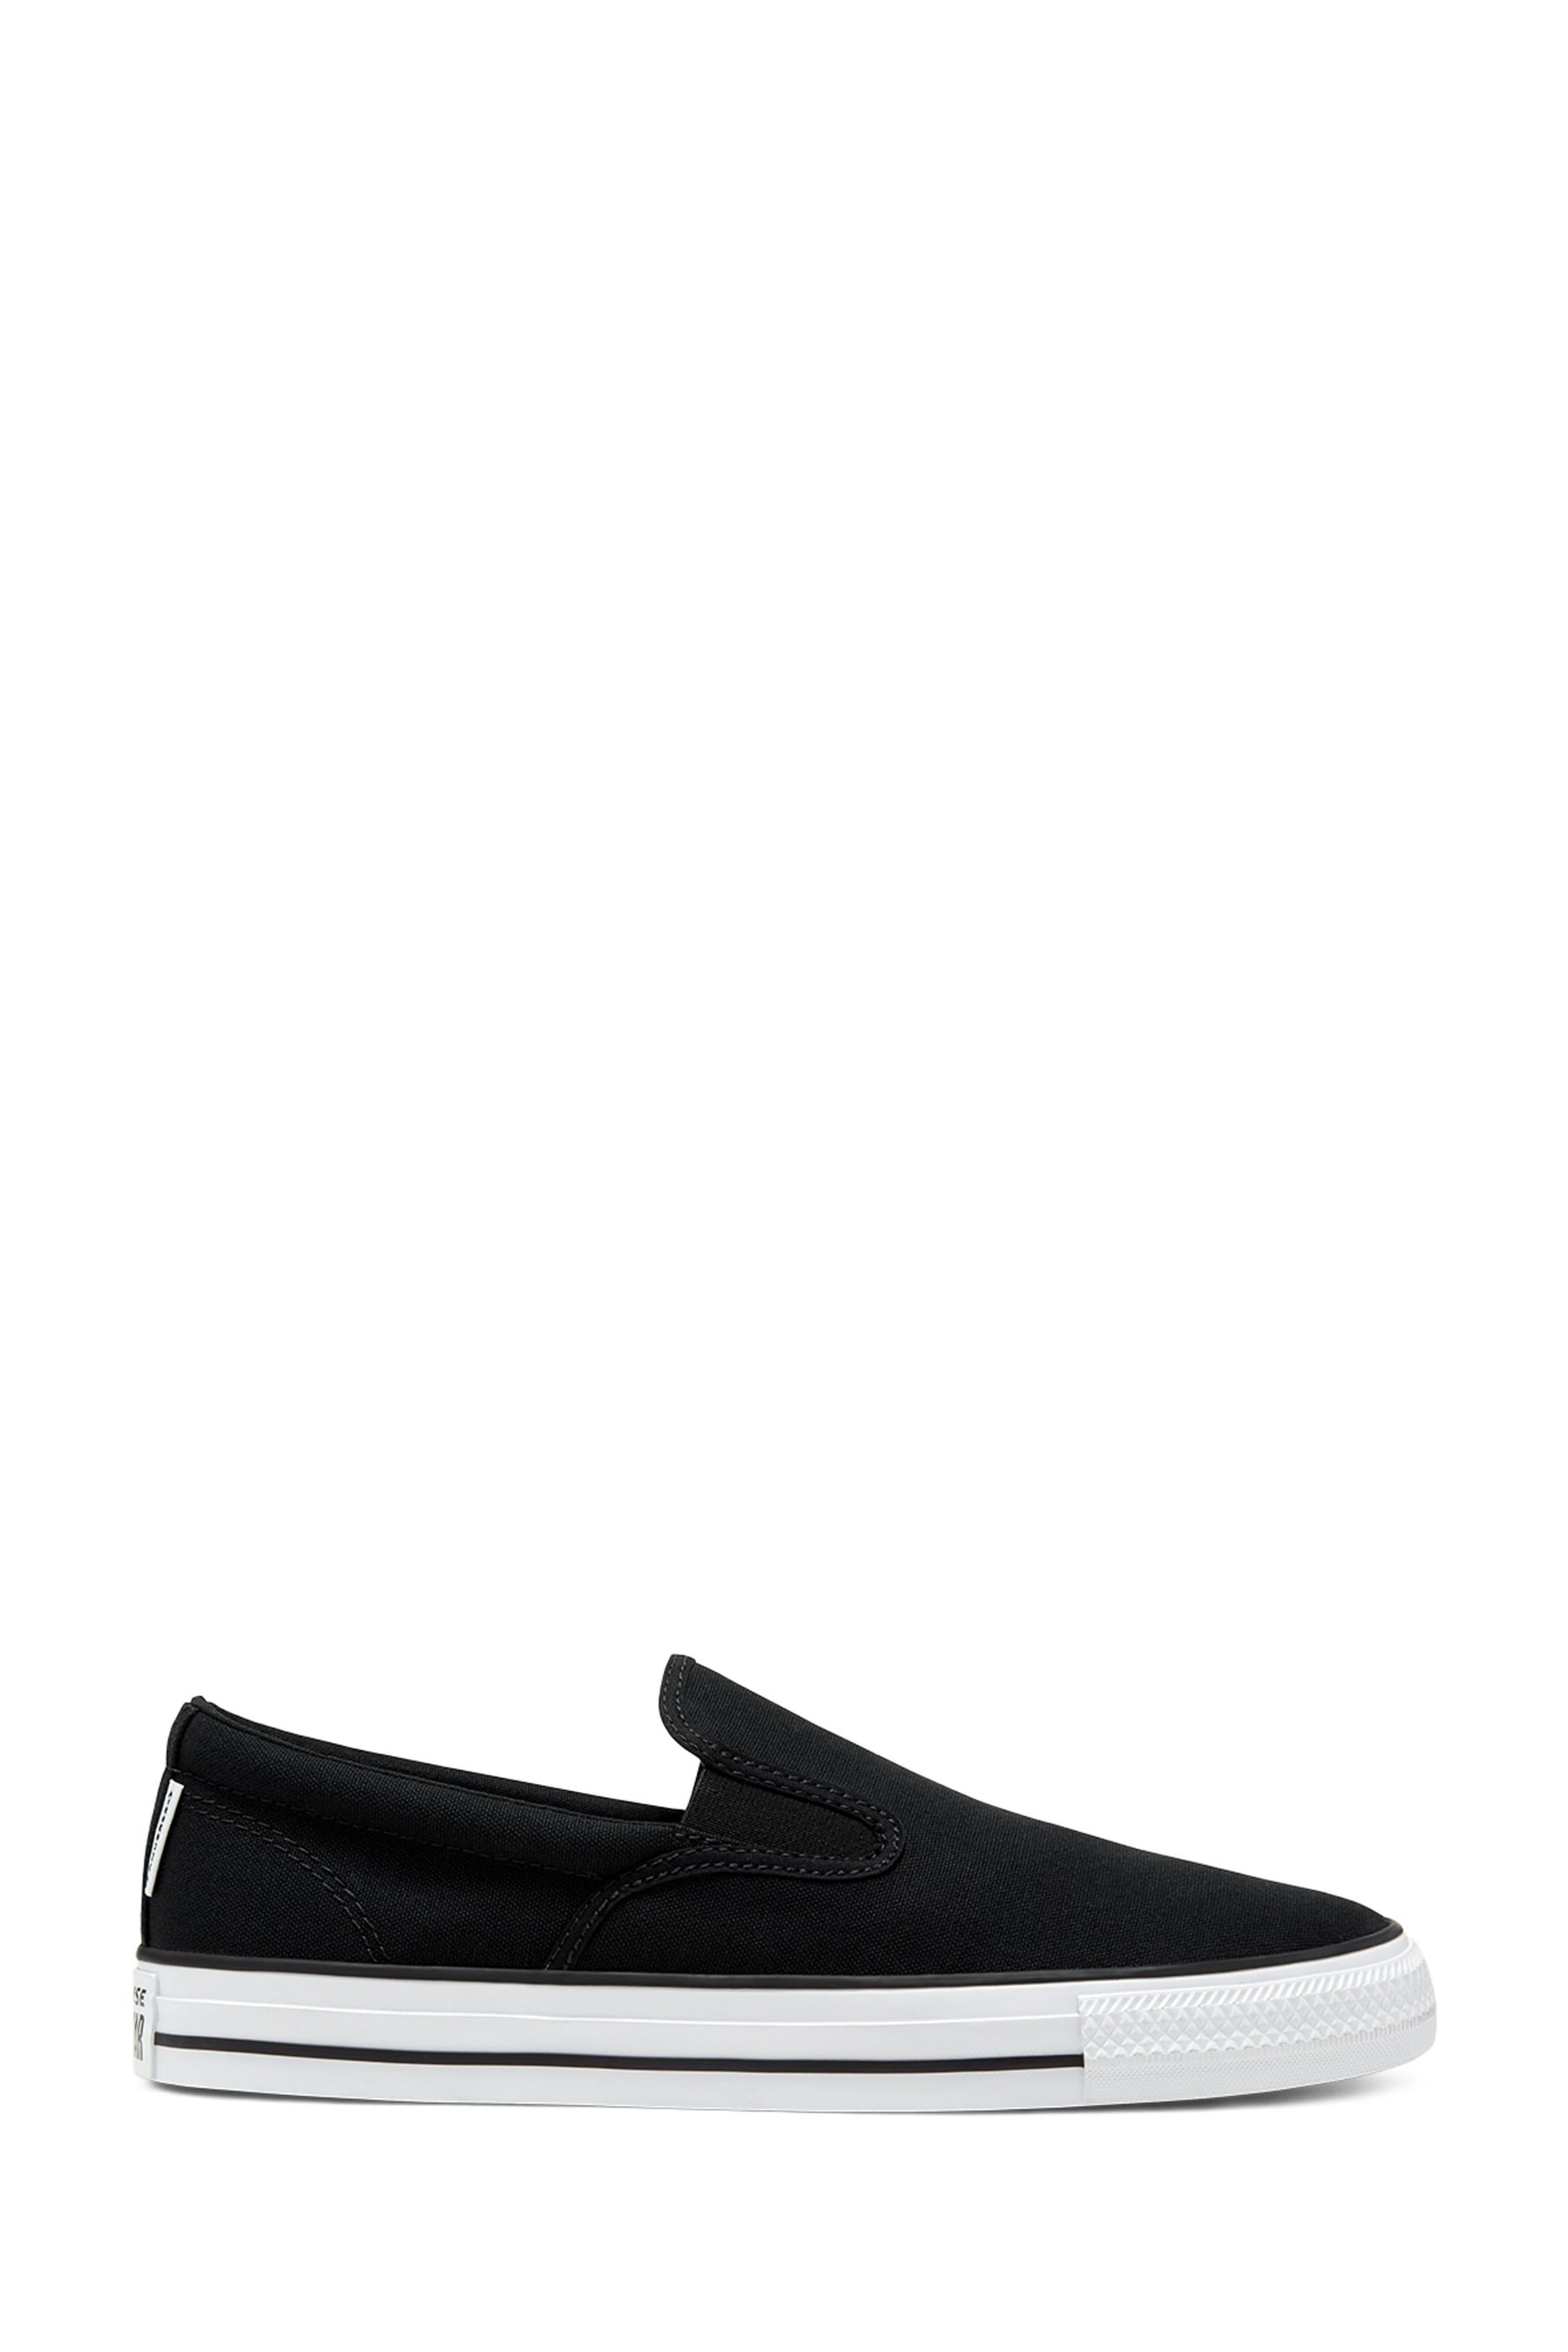 Buy Converse Slip-On Trainers from the Next UK online shop